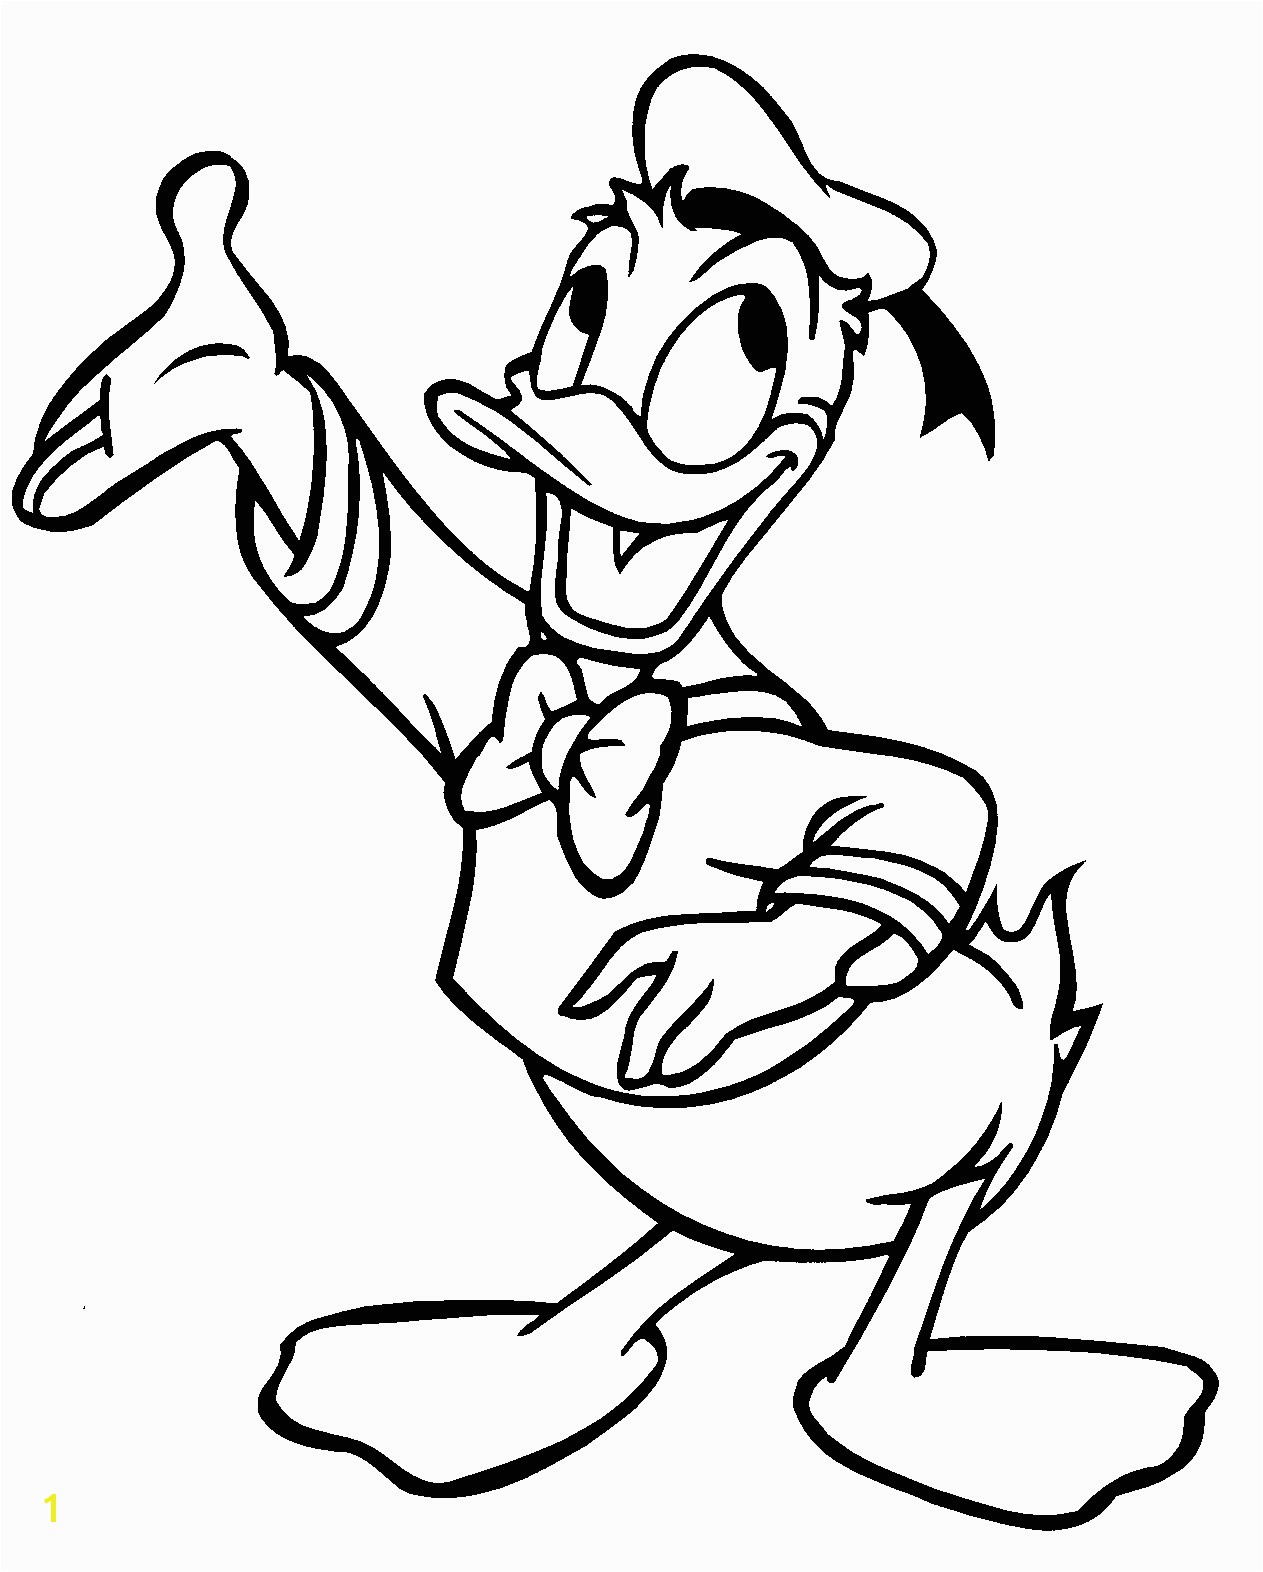 Duck Coloring Pic New Lifetime Donald Duck Coloring Pages to Print for Free Printable Kids